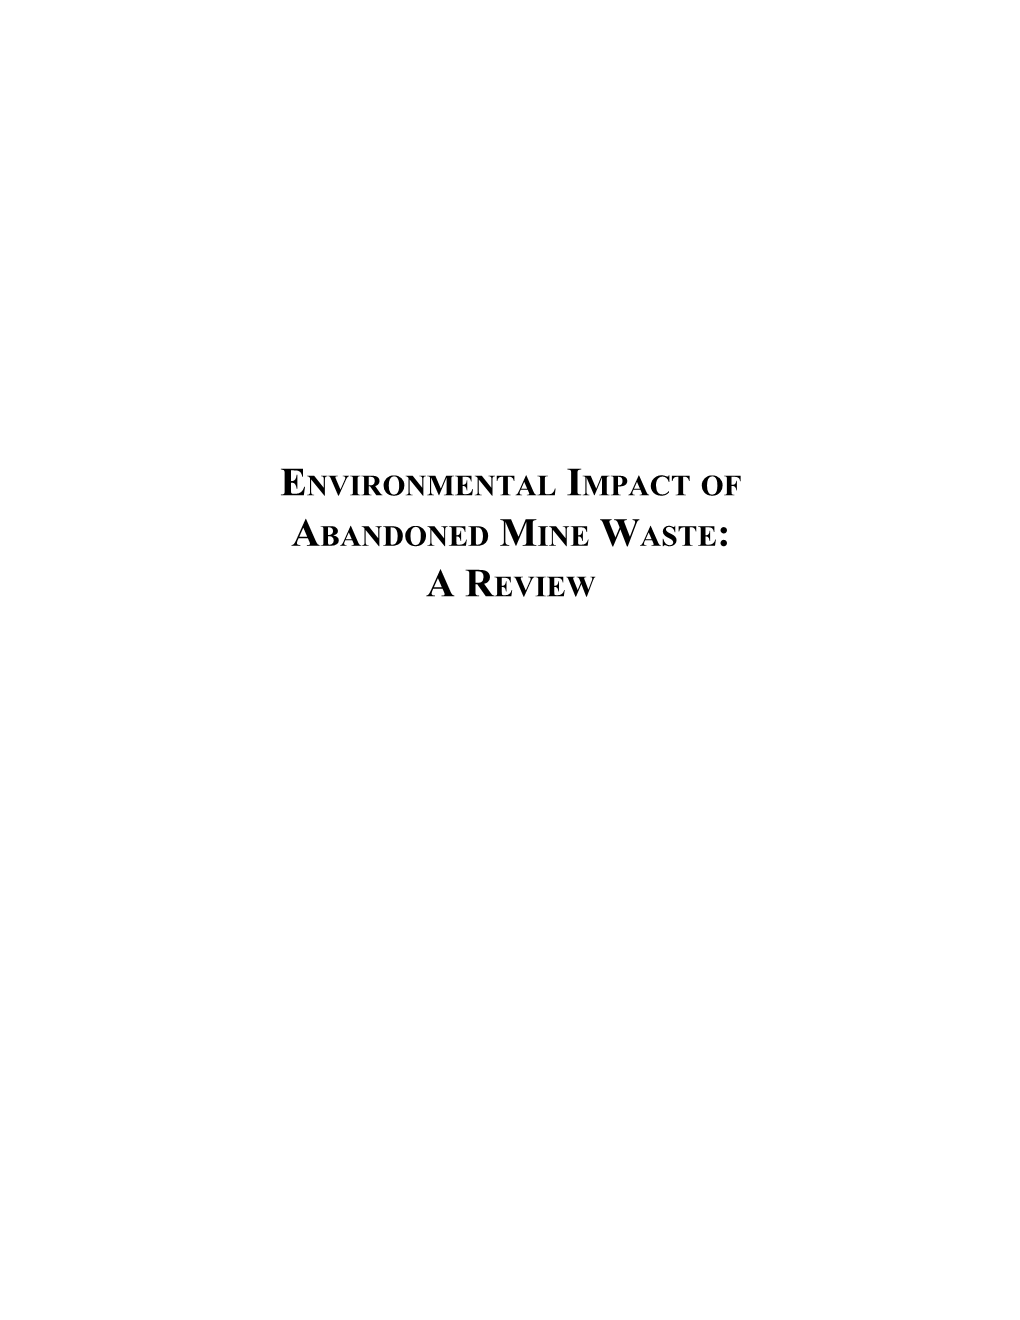 Environmental Impact of Abandoned Mine Waste: a Review